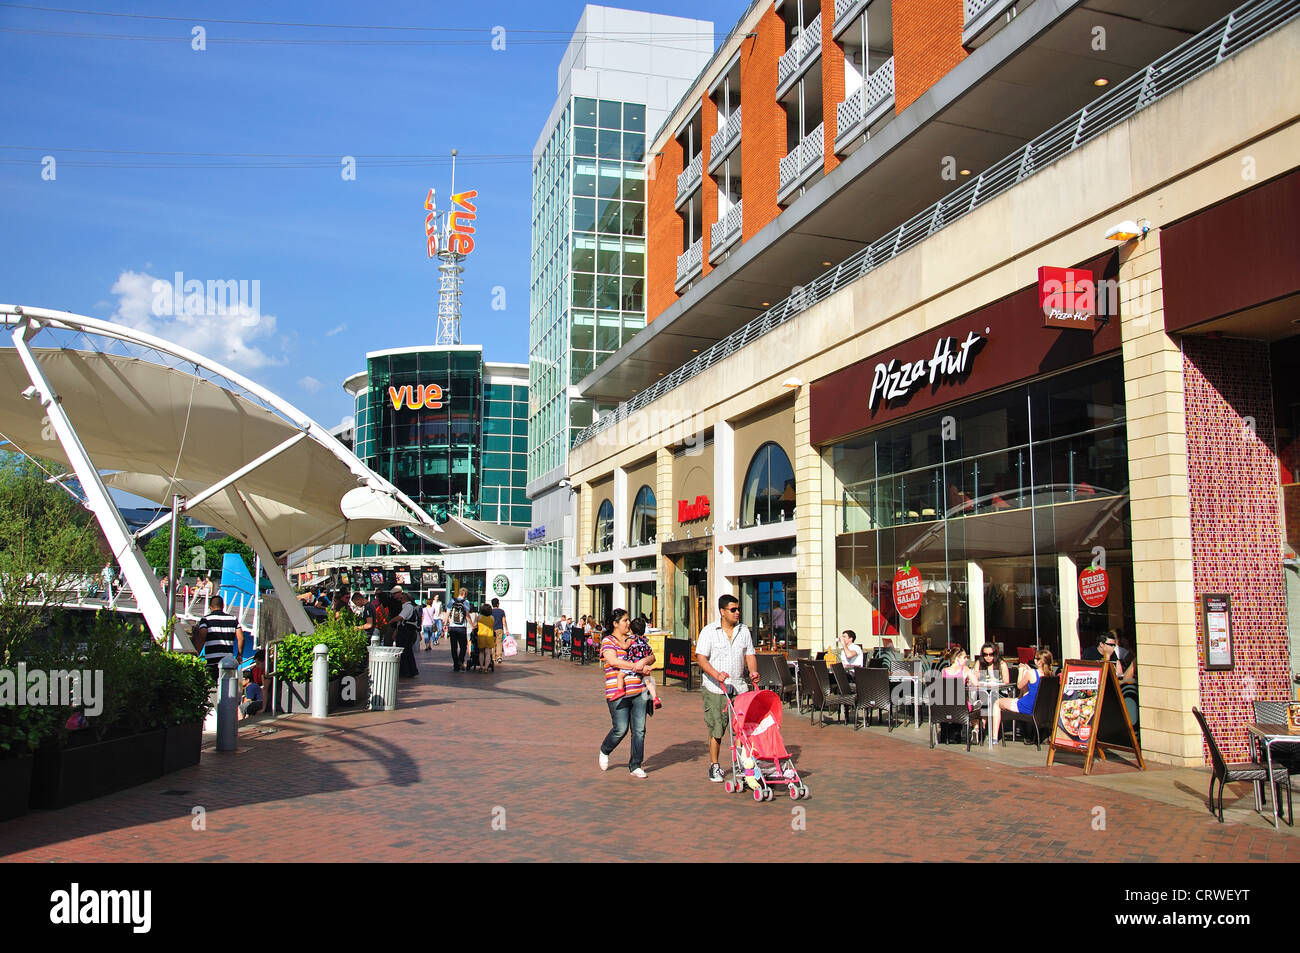 Riverside shops and cafes, The Oracle Shopping Centre, Reading, Berkshire, England, United Kingdom Stock Photo